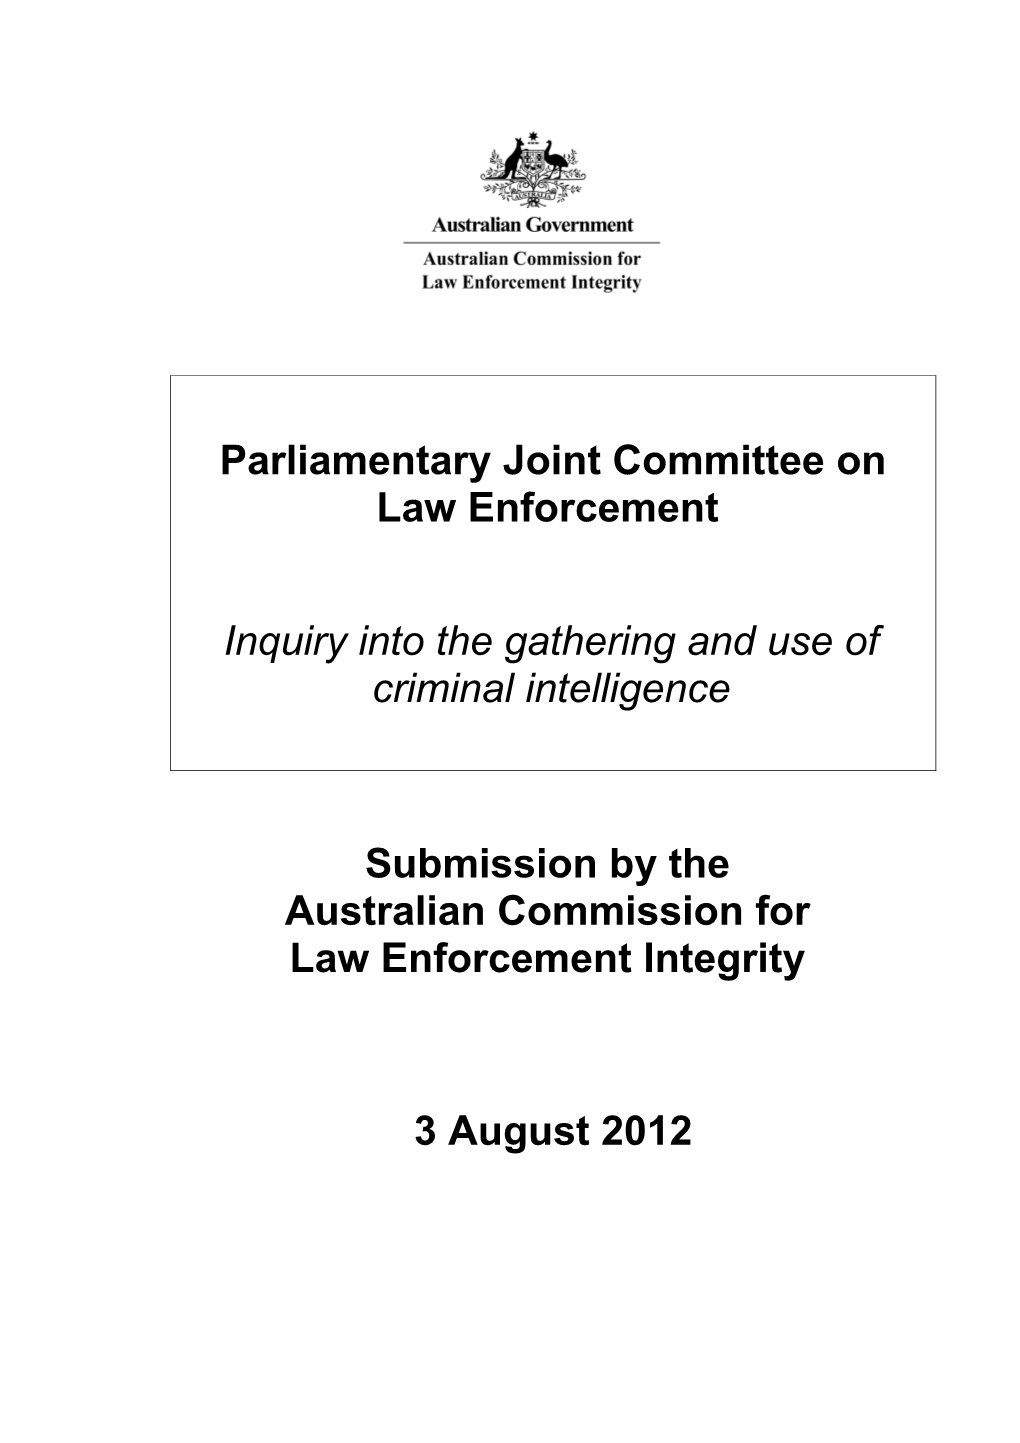 ACLEI Submission: Inquiry Into the Gathering and Use of Criminal Intelligence